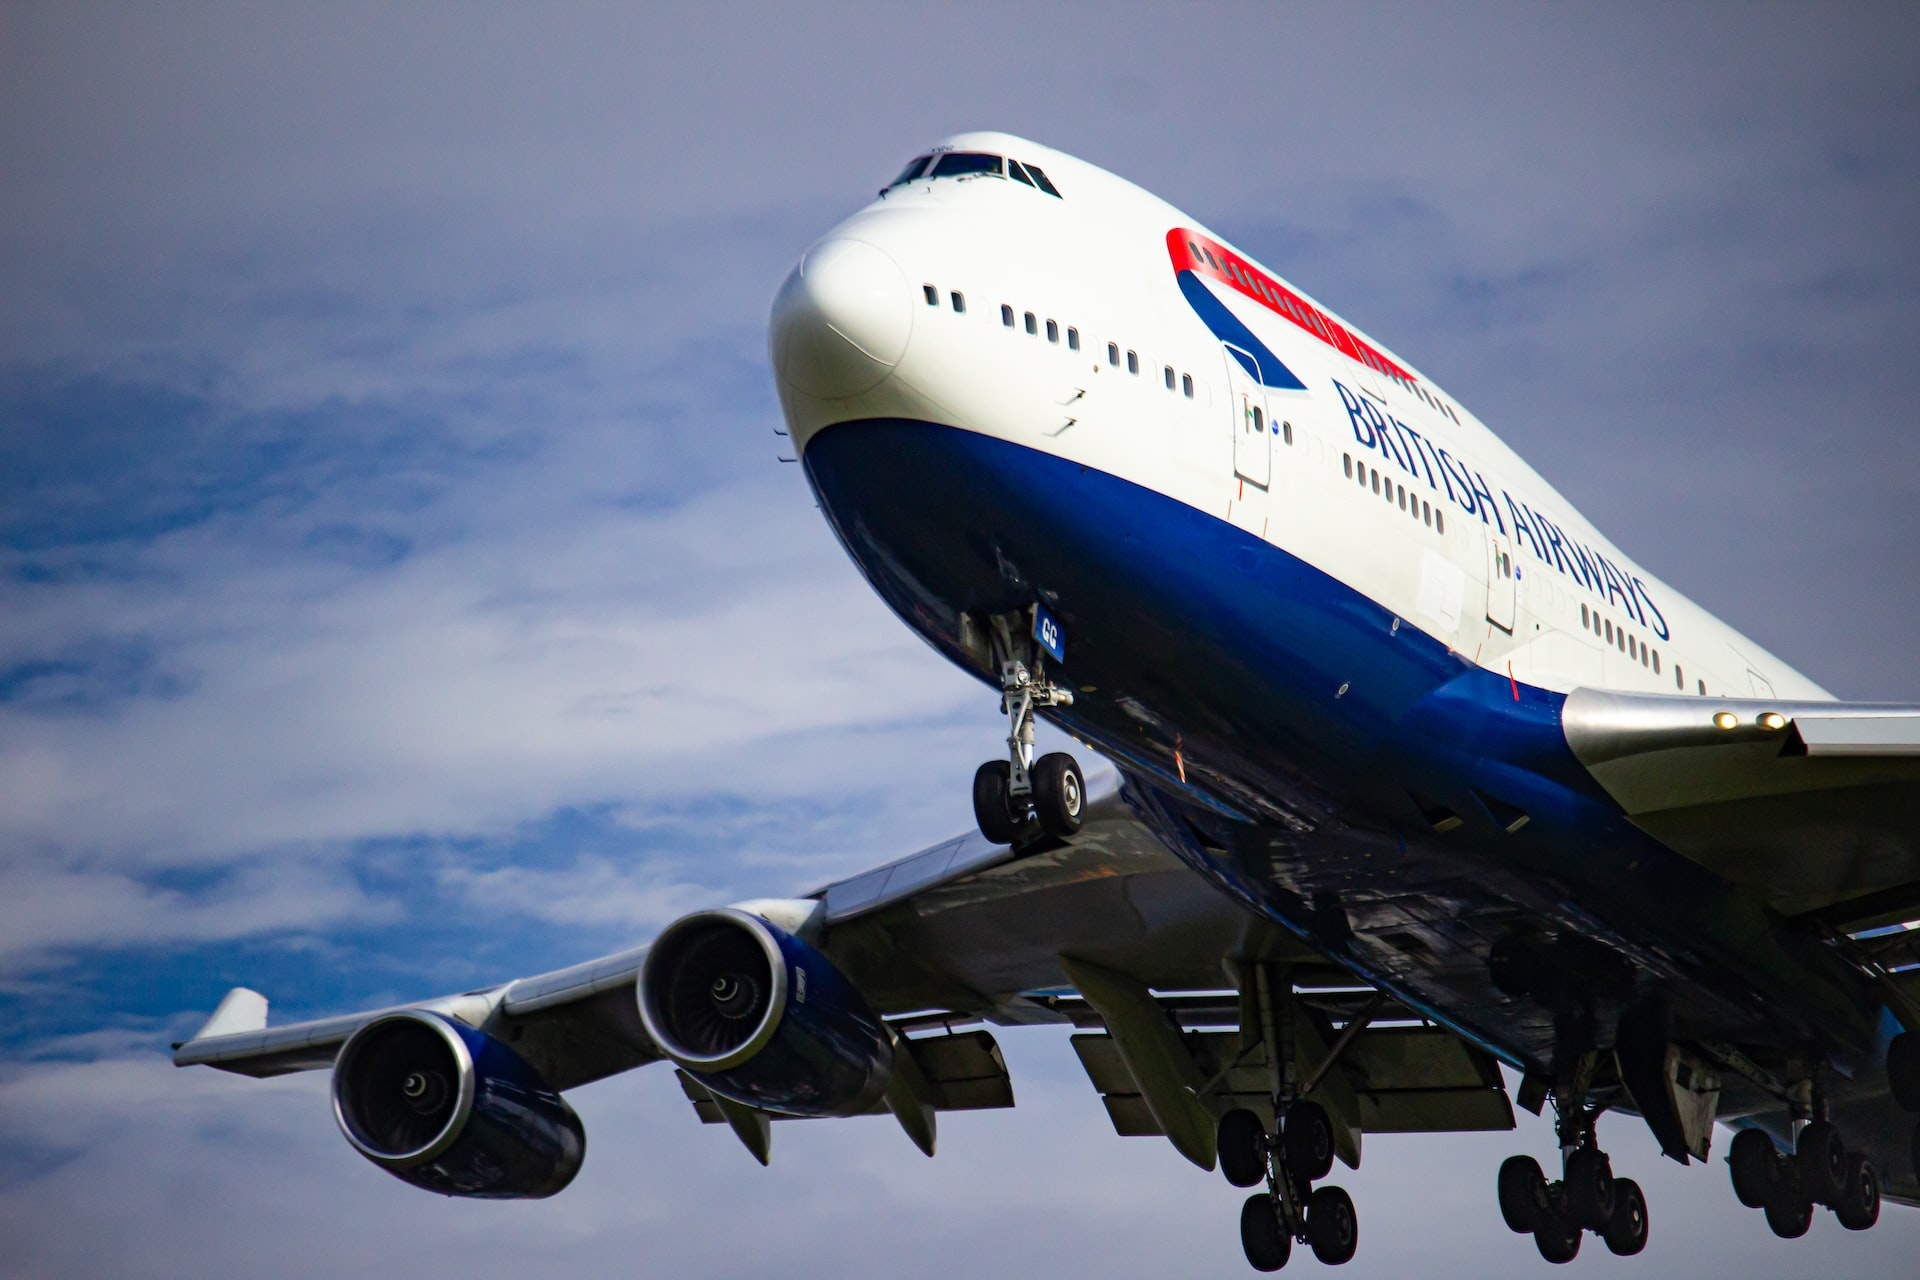 One of the most expensive airline for first class flights: British Airways aircraft.